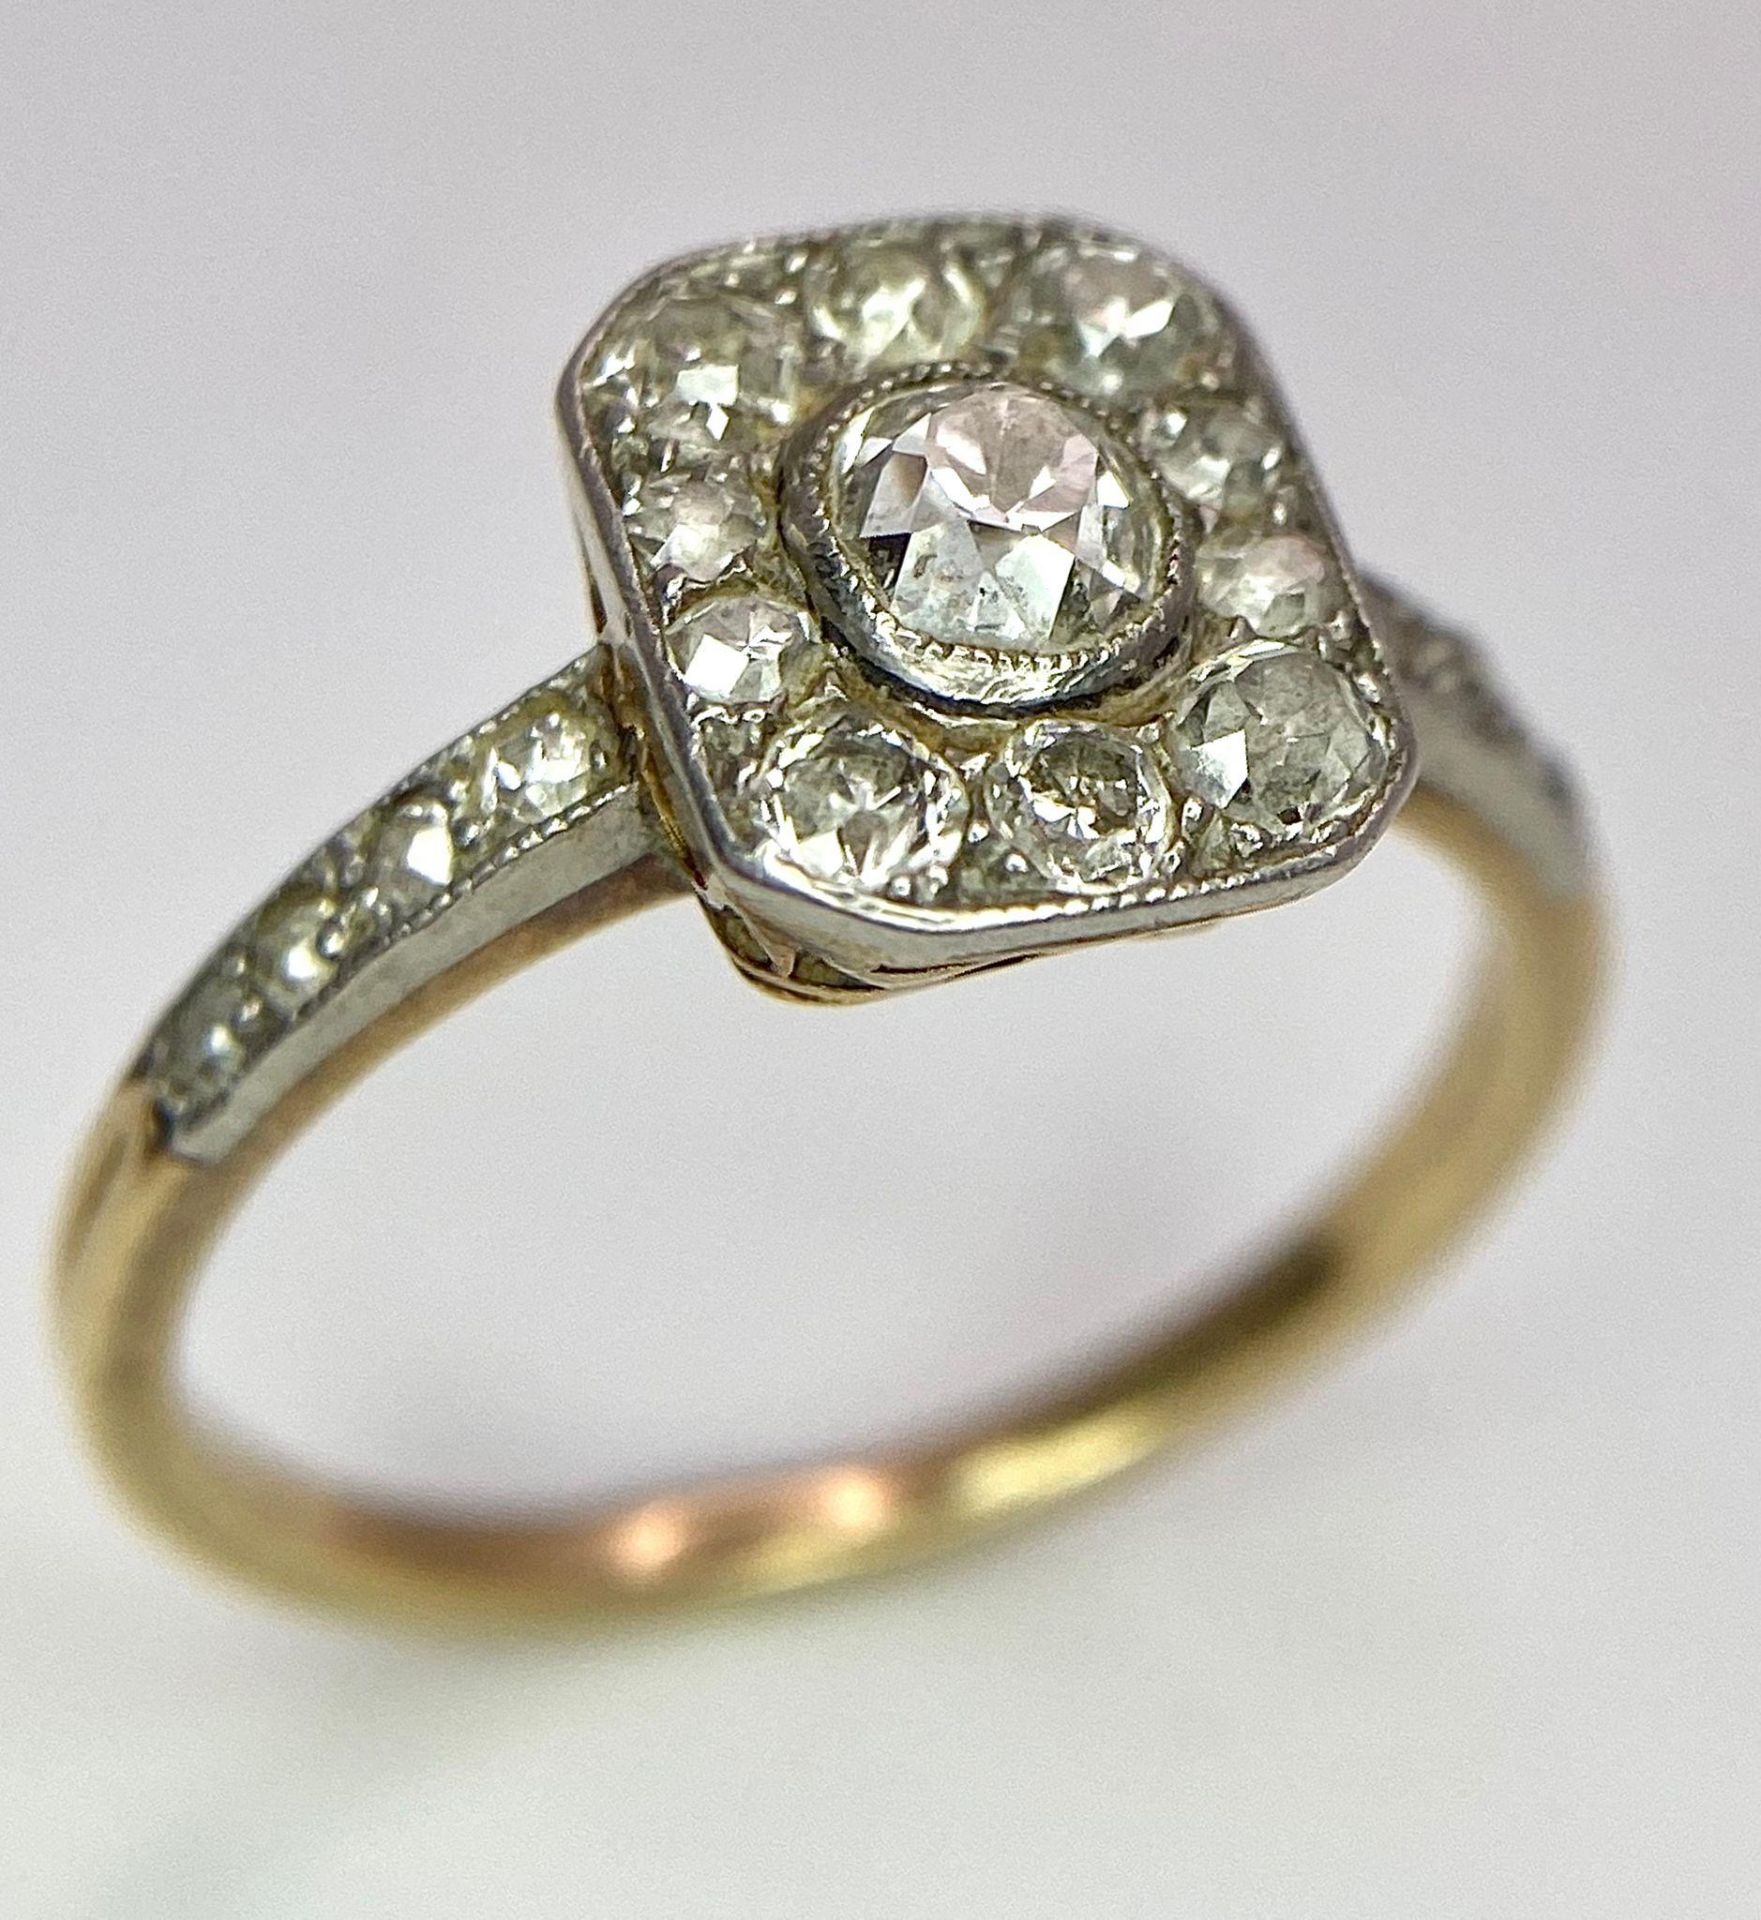 A 9 K yellow gold ring with an ART DECO style diamond cluster and more diamonds on the shoulders, - Image 3 of 8